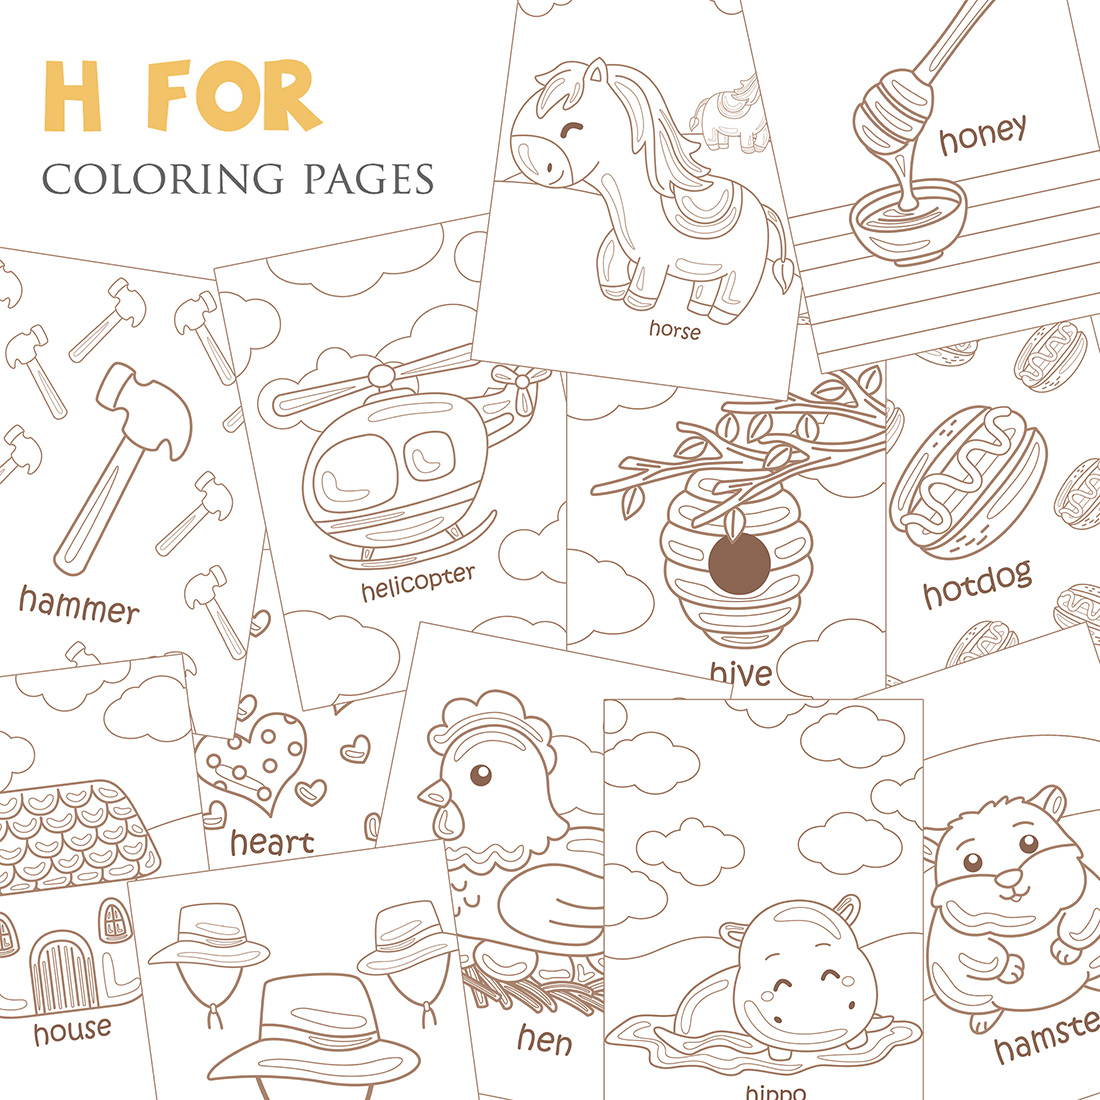 Alphabet H For Vocabulary School Letter Reading Writing Font Study Learning Student Toodler Kids Hive Hamster Heart Honey Horse House Hat Hotdog Hippo Helicopter Hen Cartoon Coloring Pages for Kids and Adult cover image.